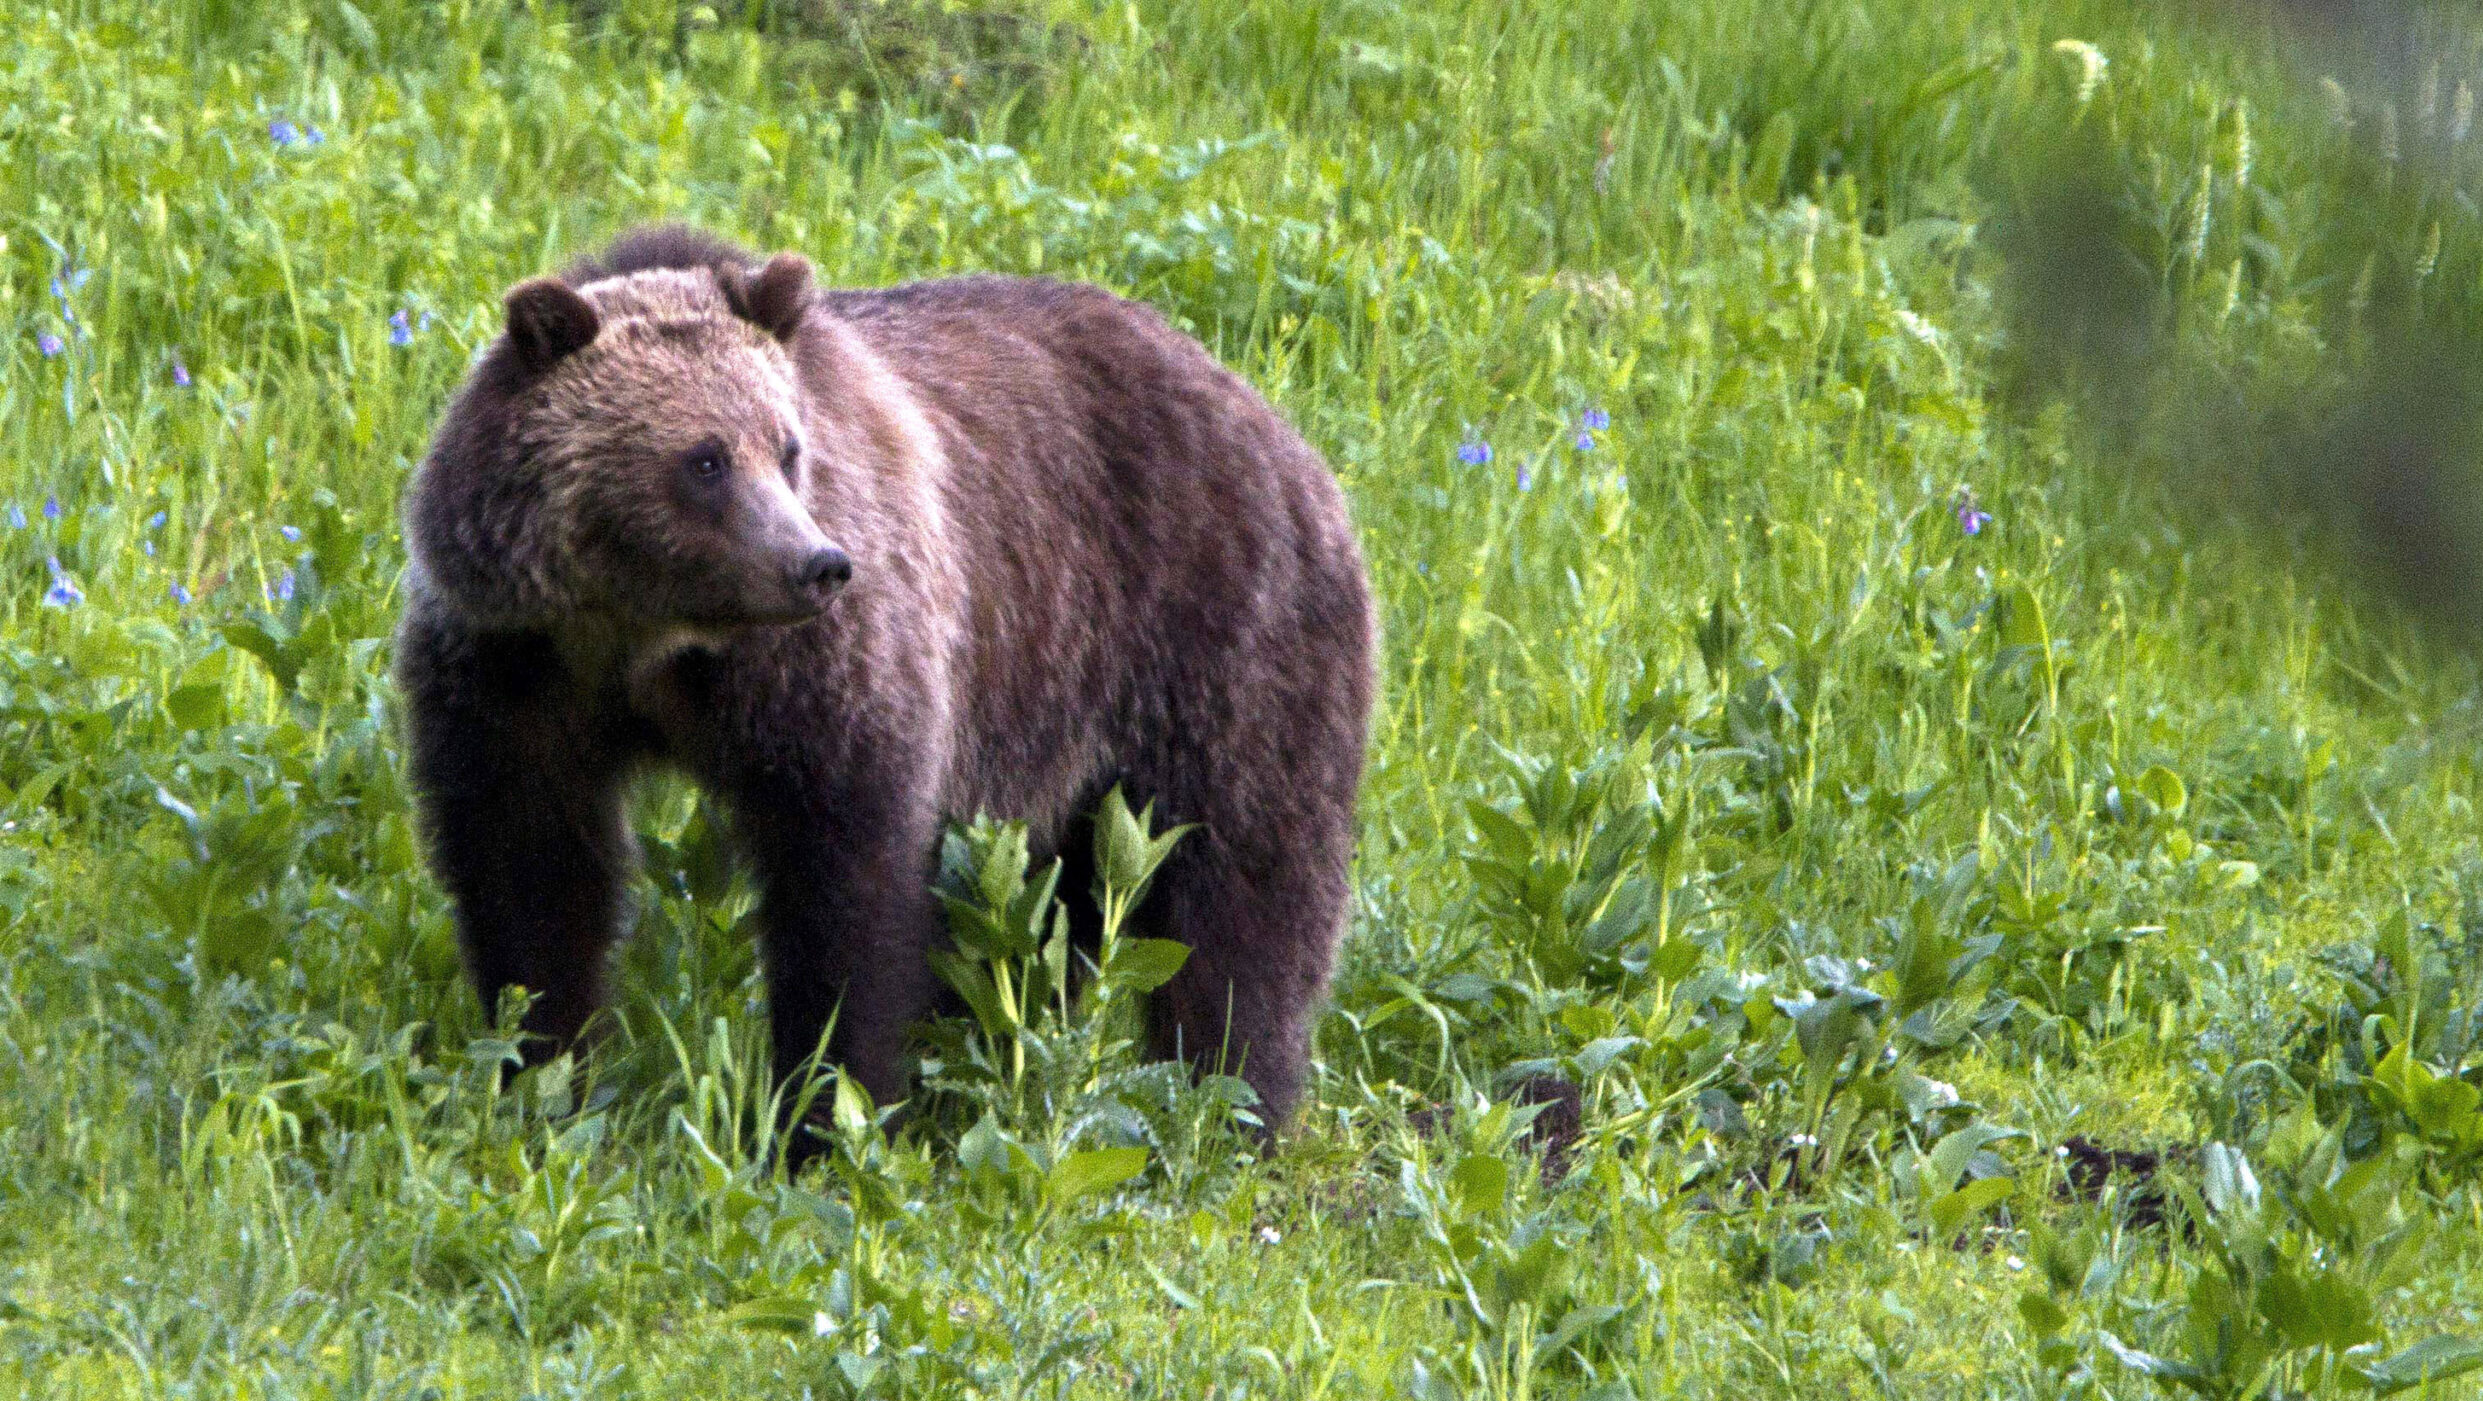 grizzly bear is pictured, a man in yellowstone was recently caught on video bothering a bear...